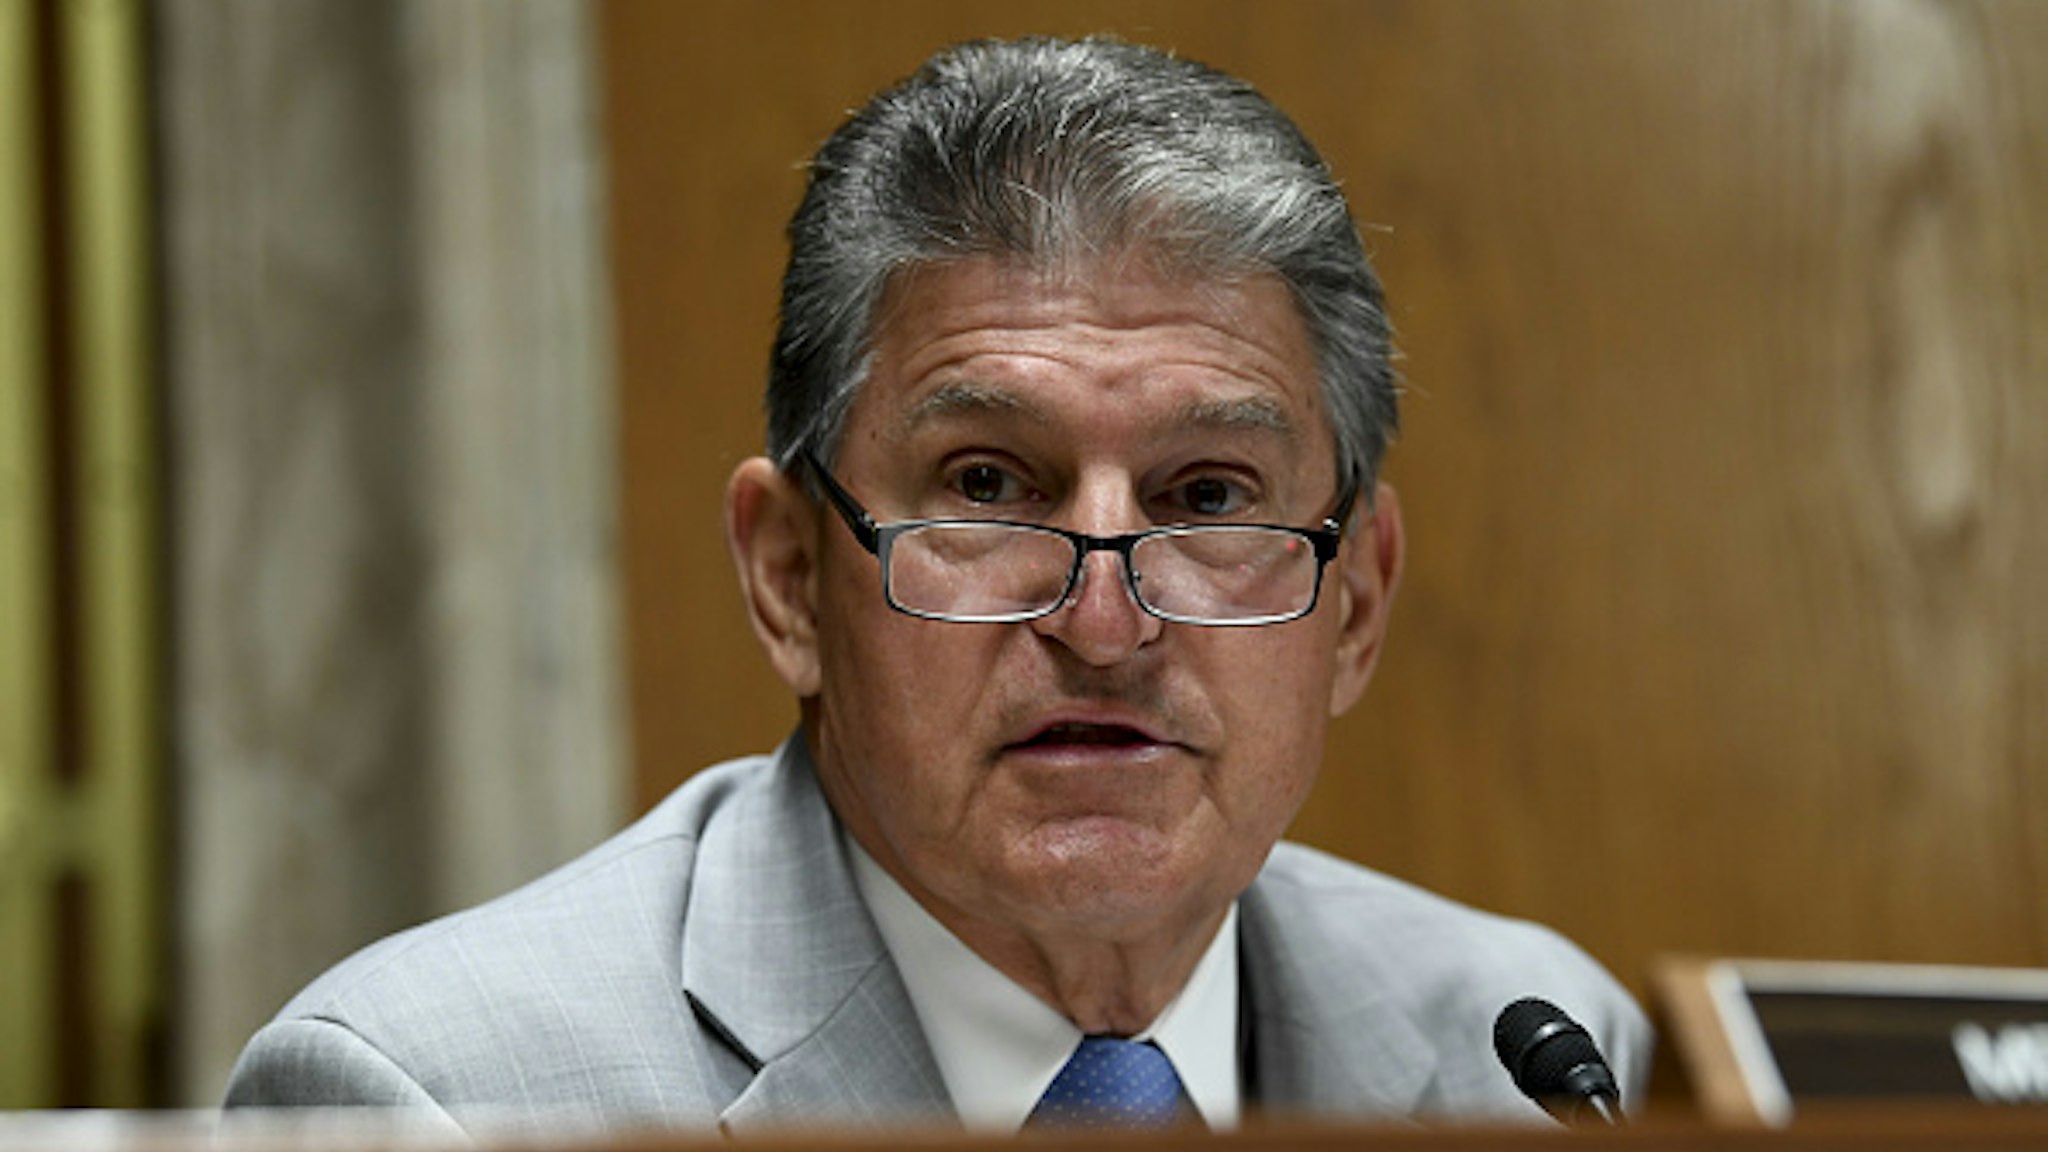 Senator Joe Manchin, a Democrat from West Virginia, speaks during a Senate Appropriations Subcommittee on Financial Services hearing in Washington, D.C., U.S., on Tuesday, June 16, 2020. The hearing will examine the Federal Communications Commission spectrum auctions program for fiscal year 2021.